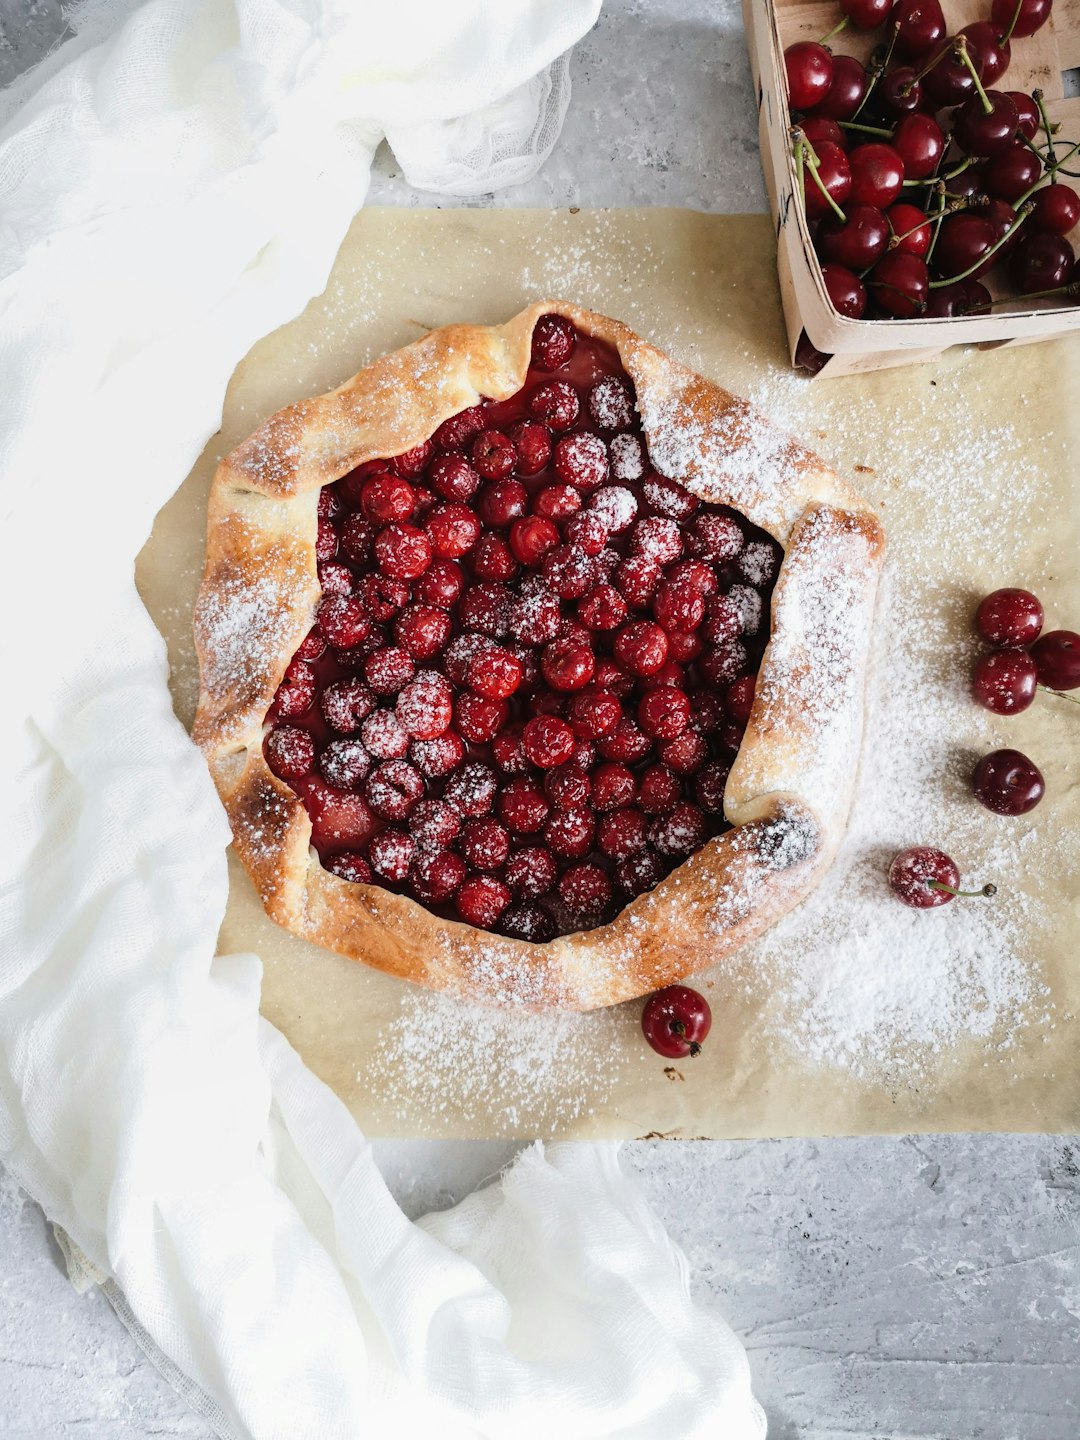 How To Make Any Fruit Galette